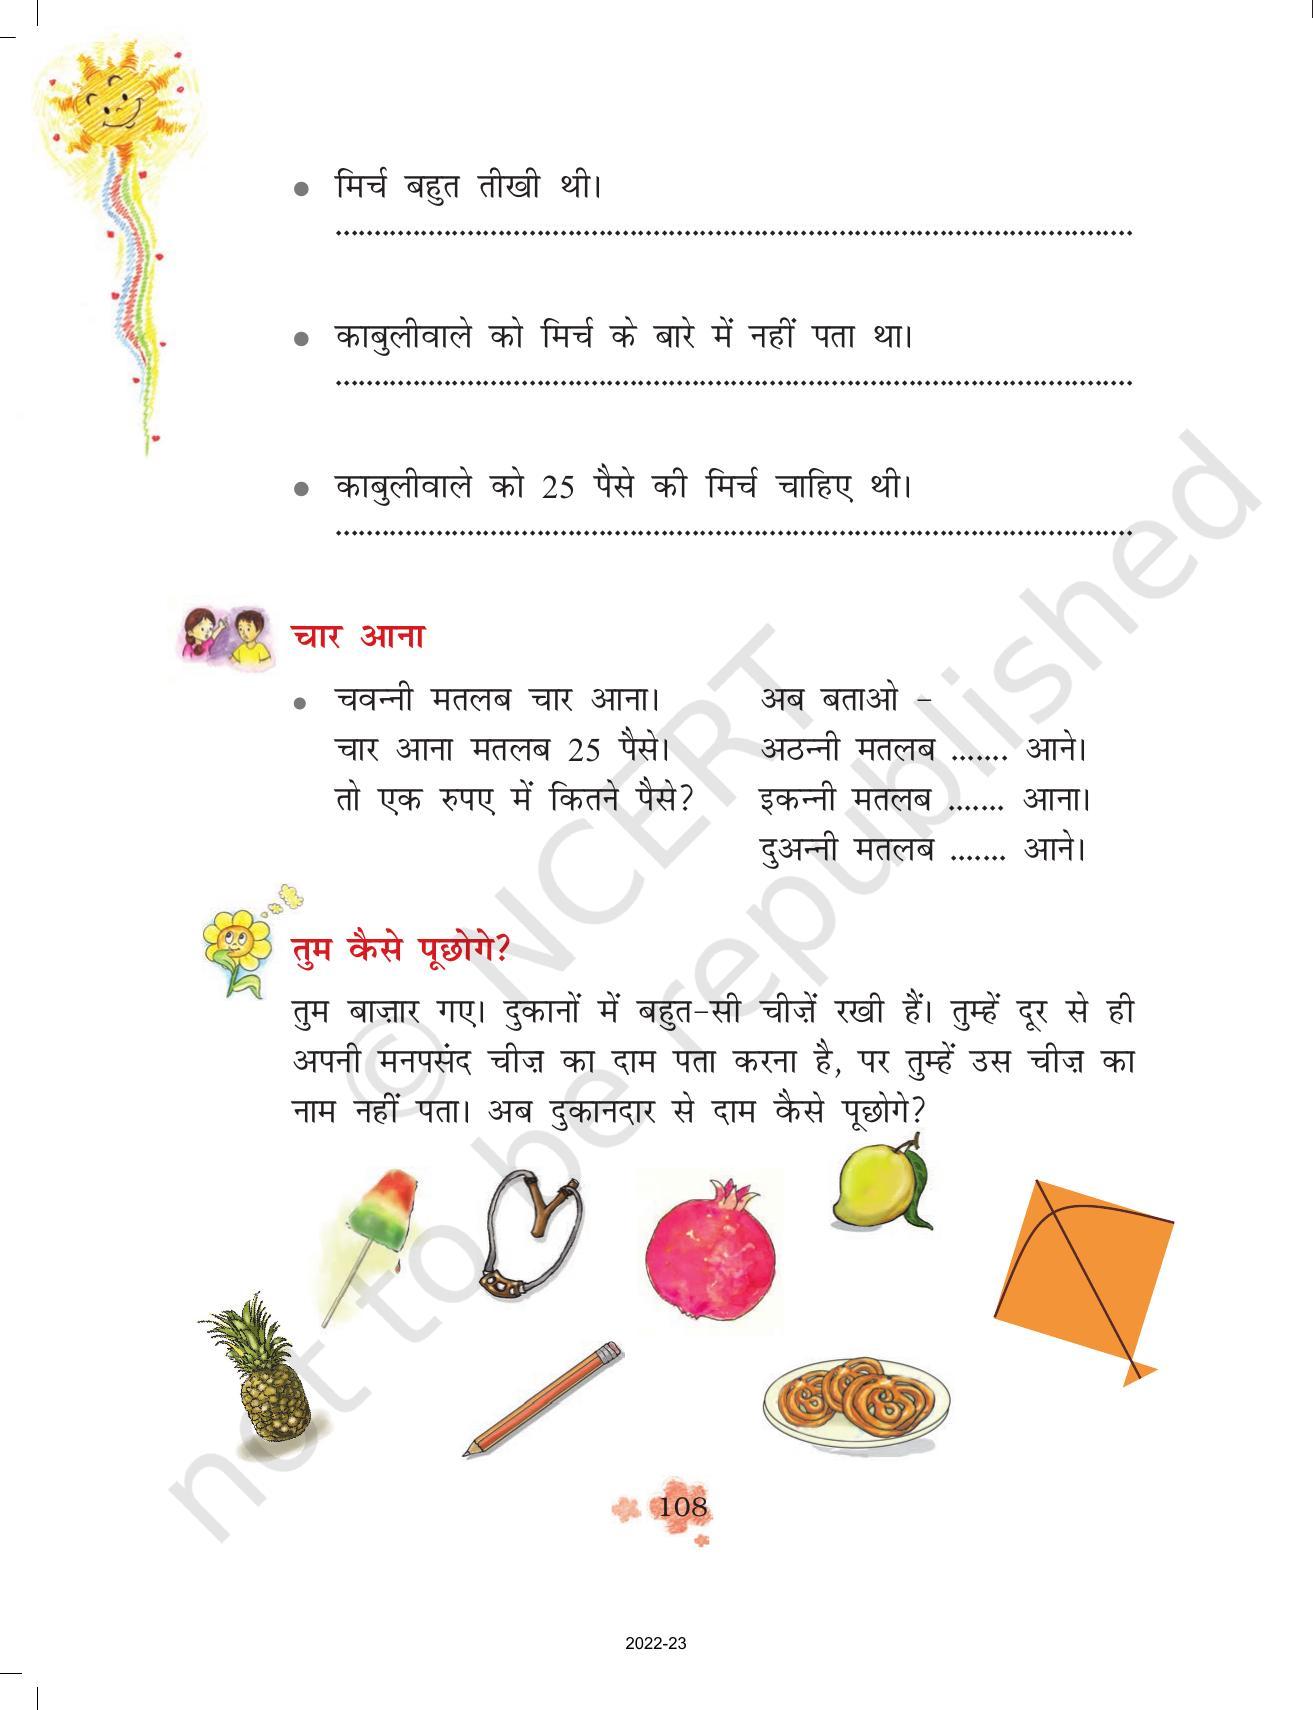 NCERT Book for Class 3 Hindi Chapter 12-मिर्च का मजा - Page 5